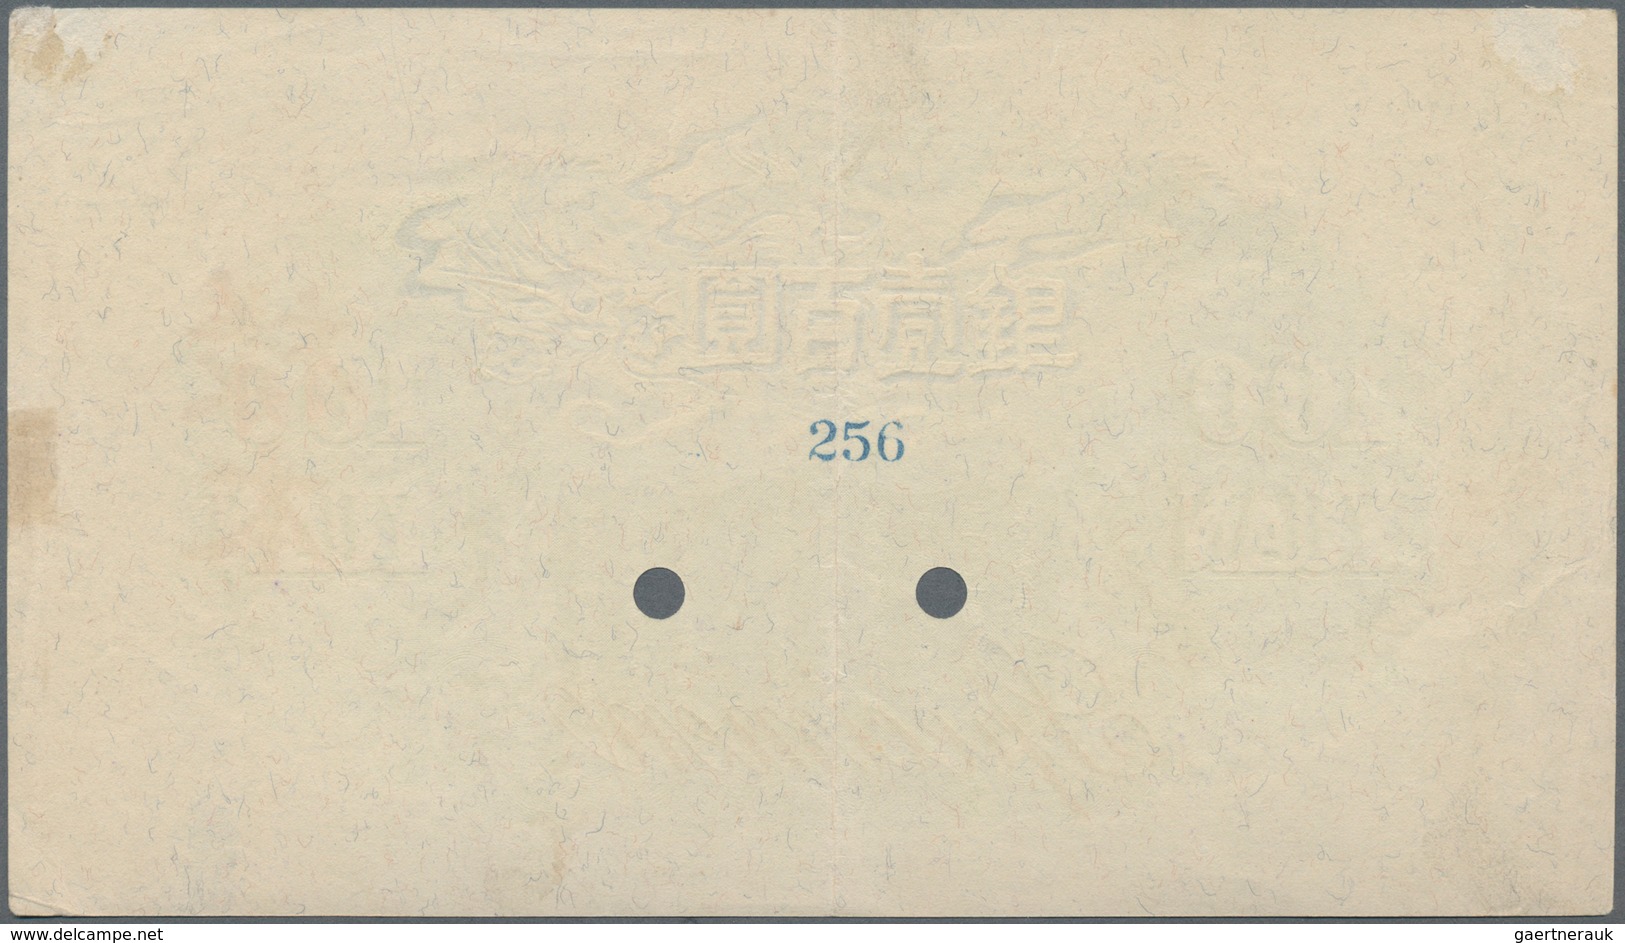 China: Central Bank Of Manchukuo 100 Yuan ND(1933) Reverse SPECIMEN, P.J128s With Specimen Number 25 - China